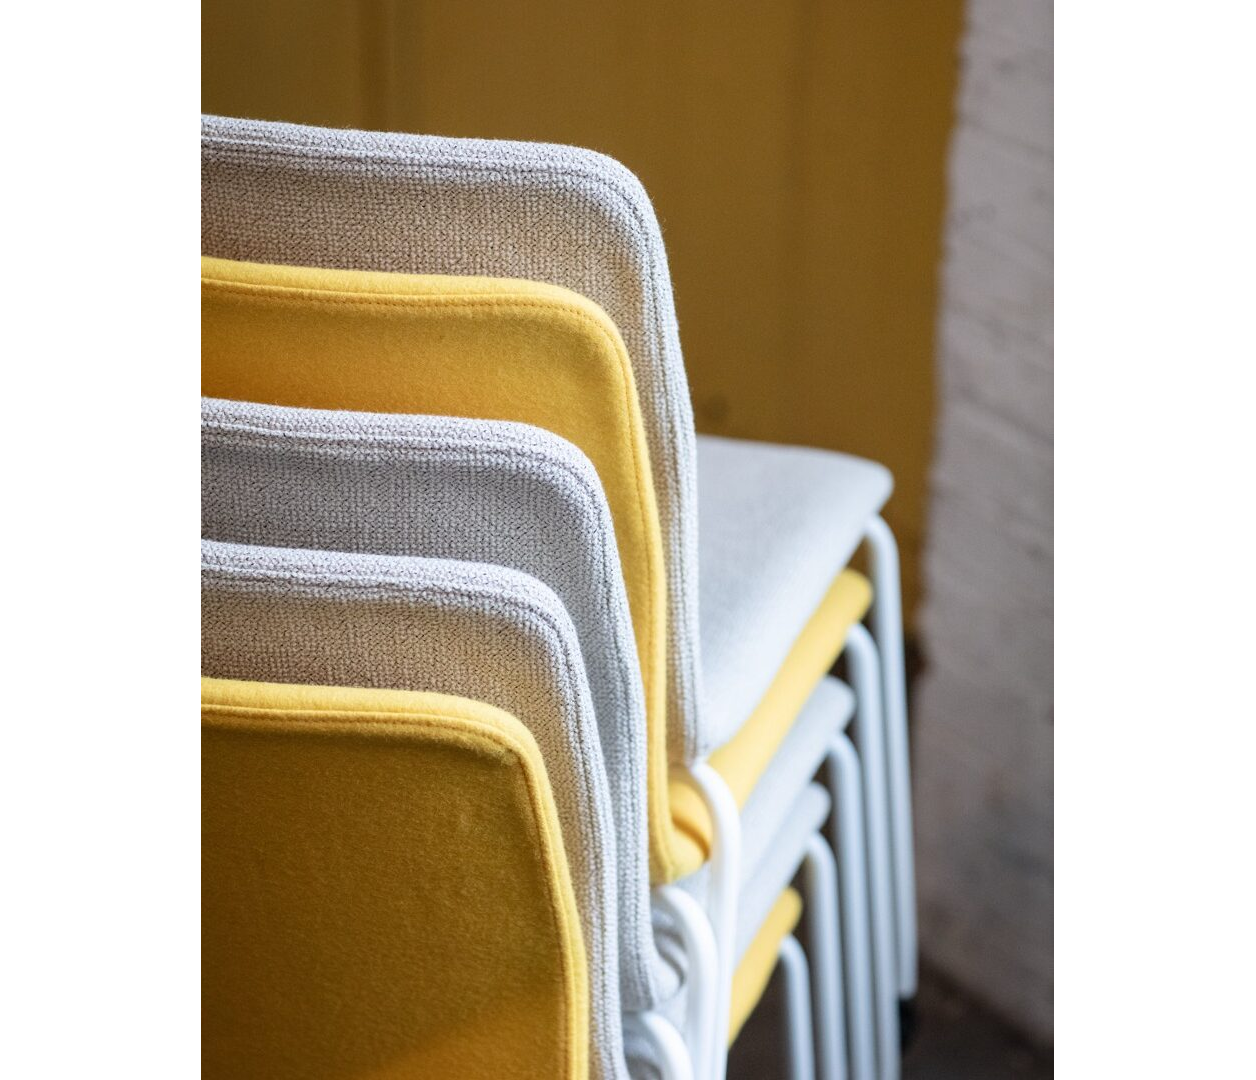 OCEE&FOUR – Chairs – FourSure 77 – Details Image 6 Large